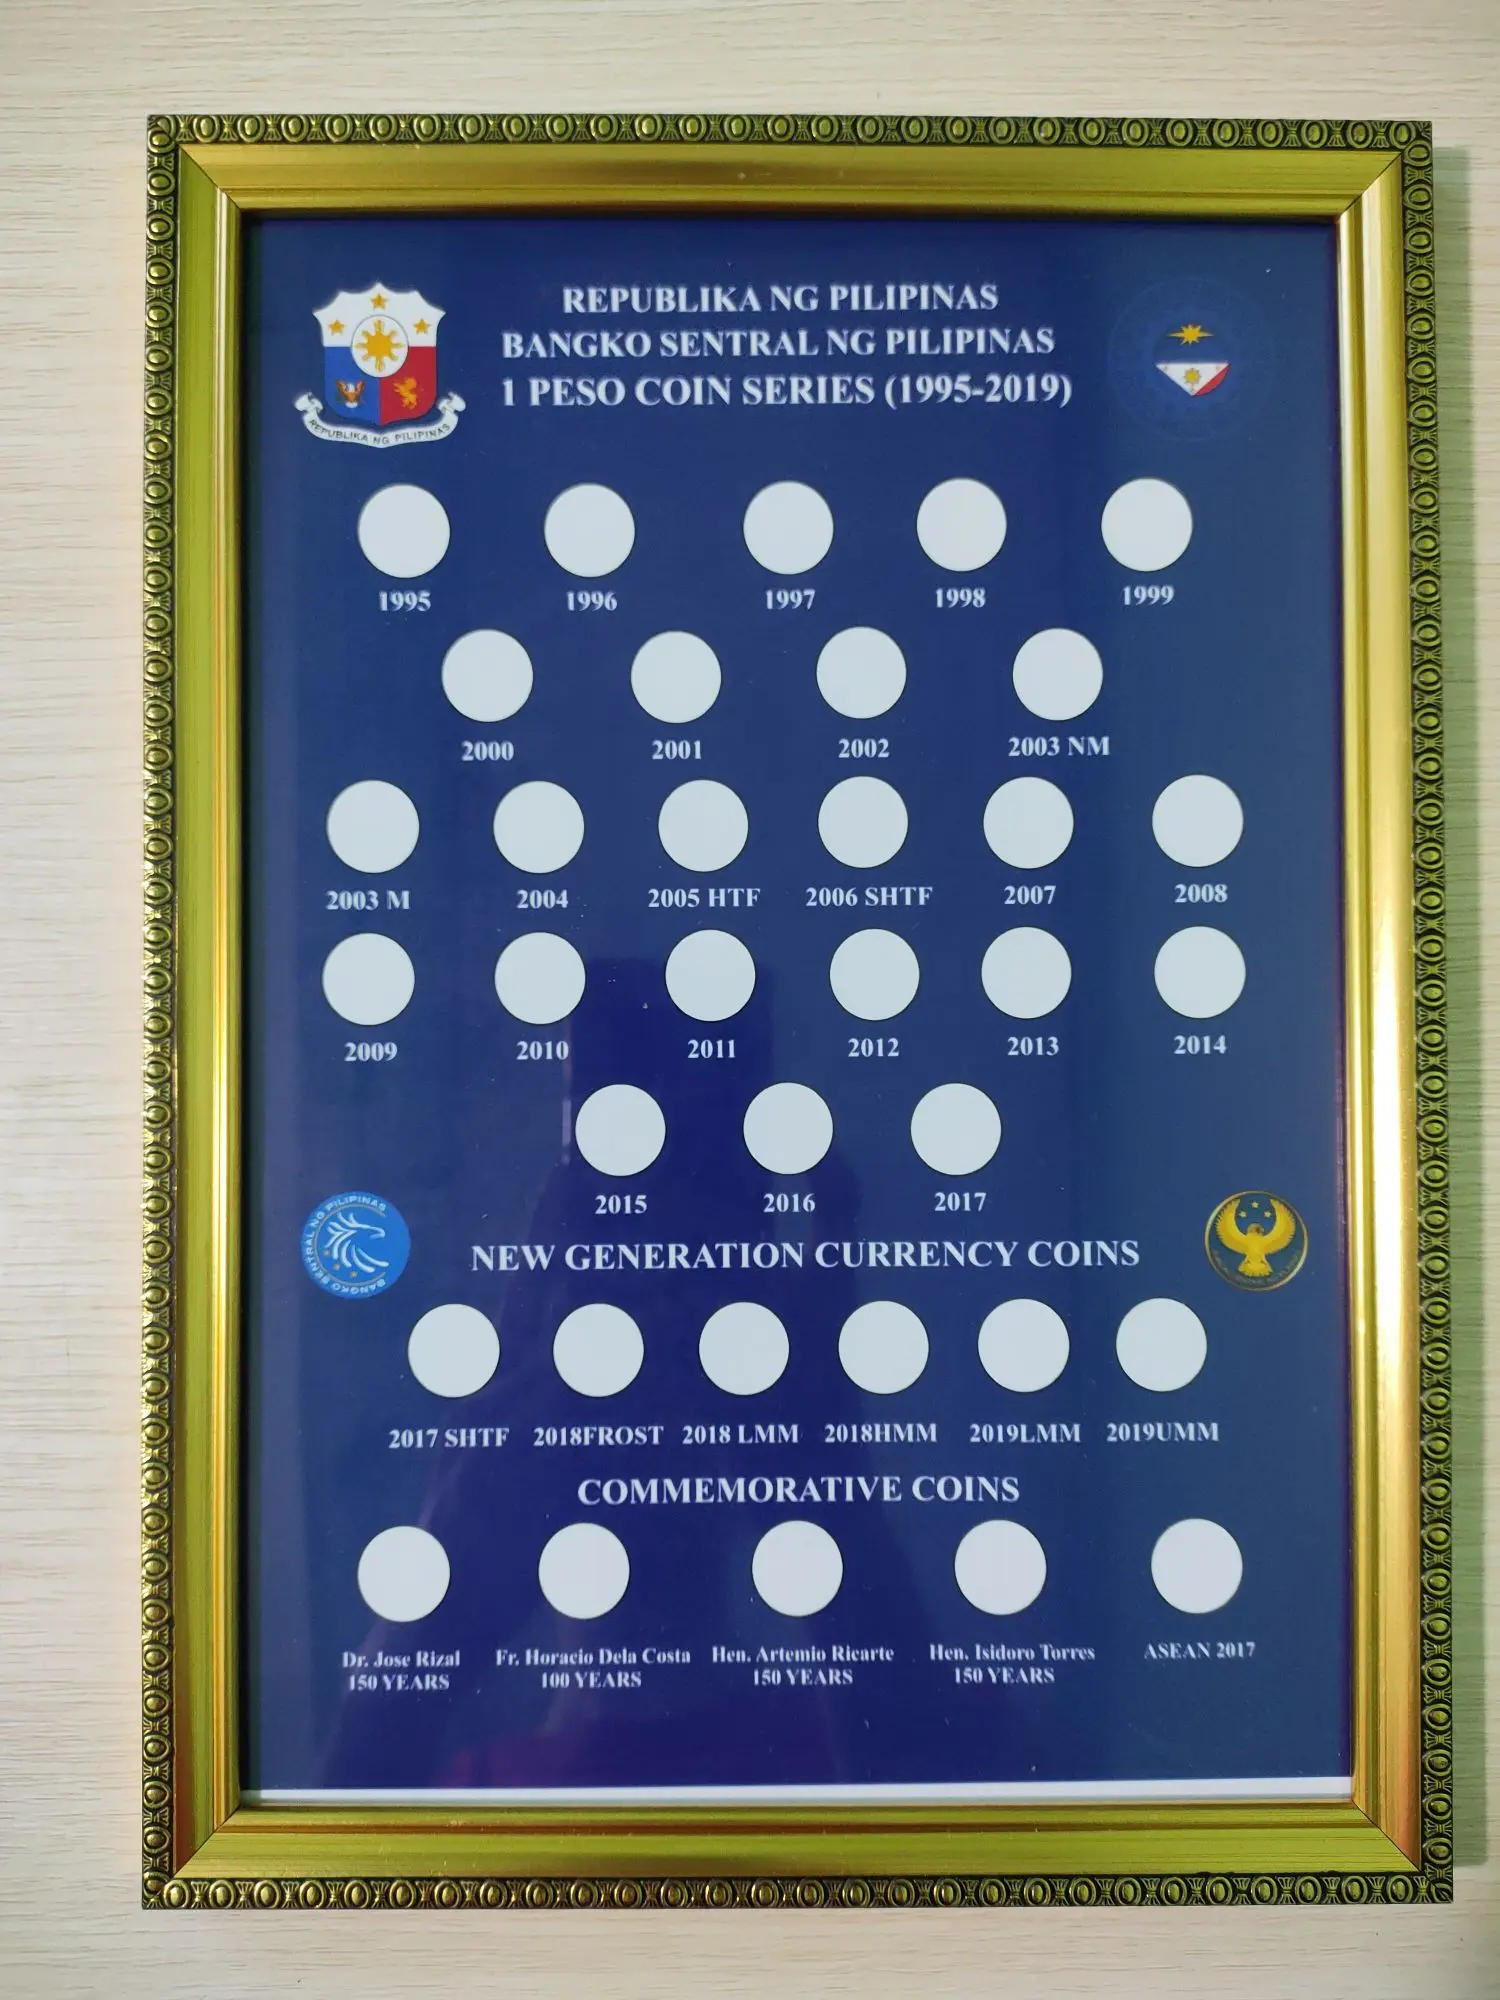 UPDATED 1 PISO BSP COIN SERIES LAYOUT WITH FRAME